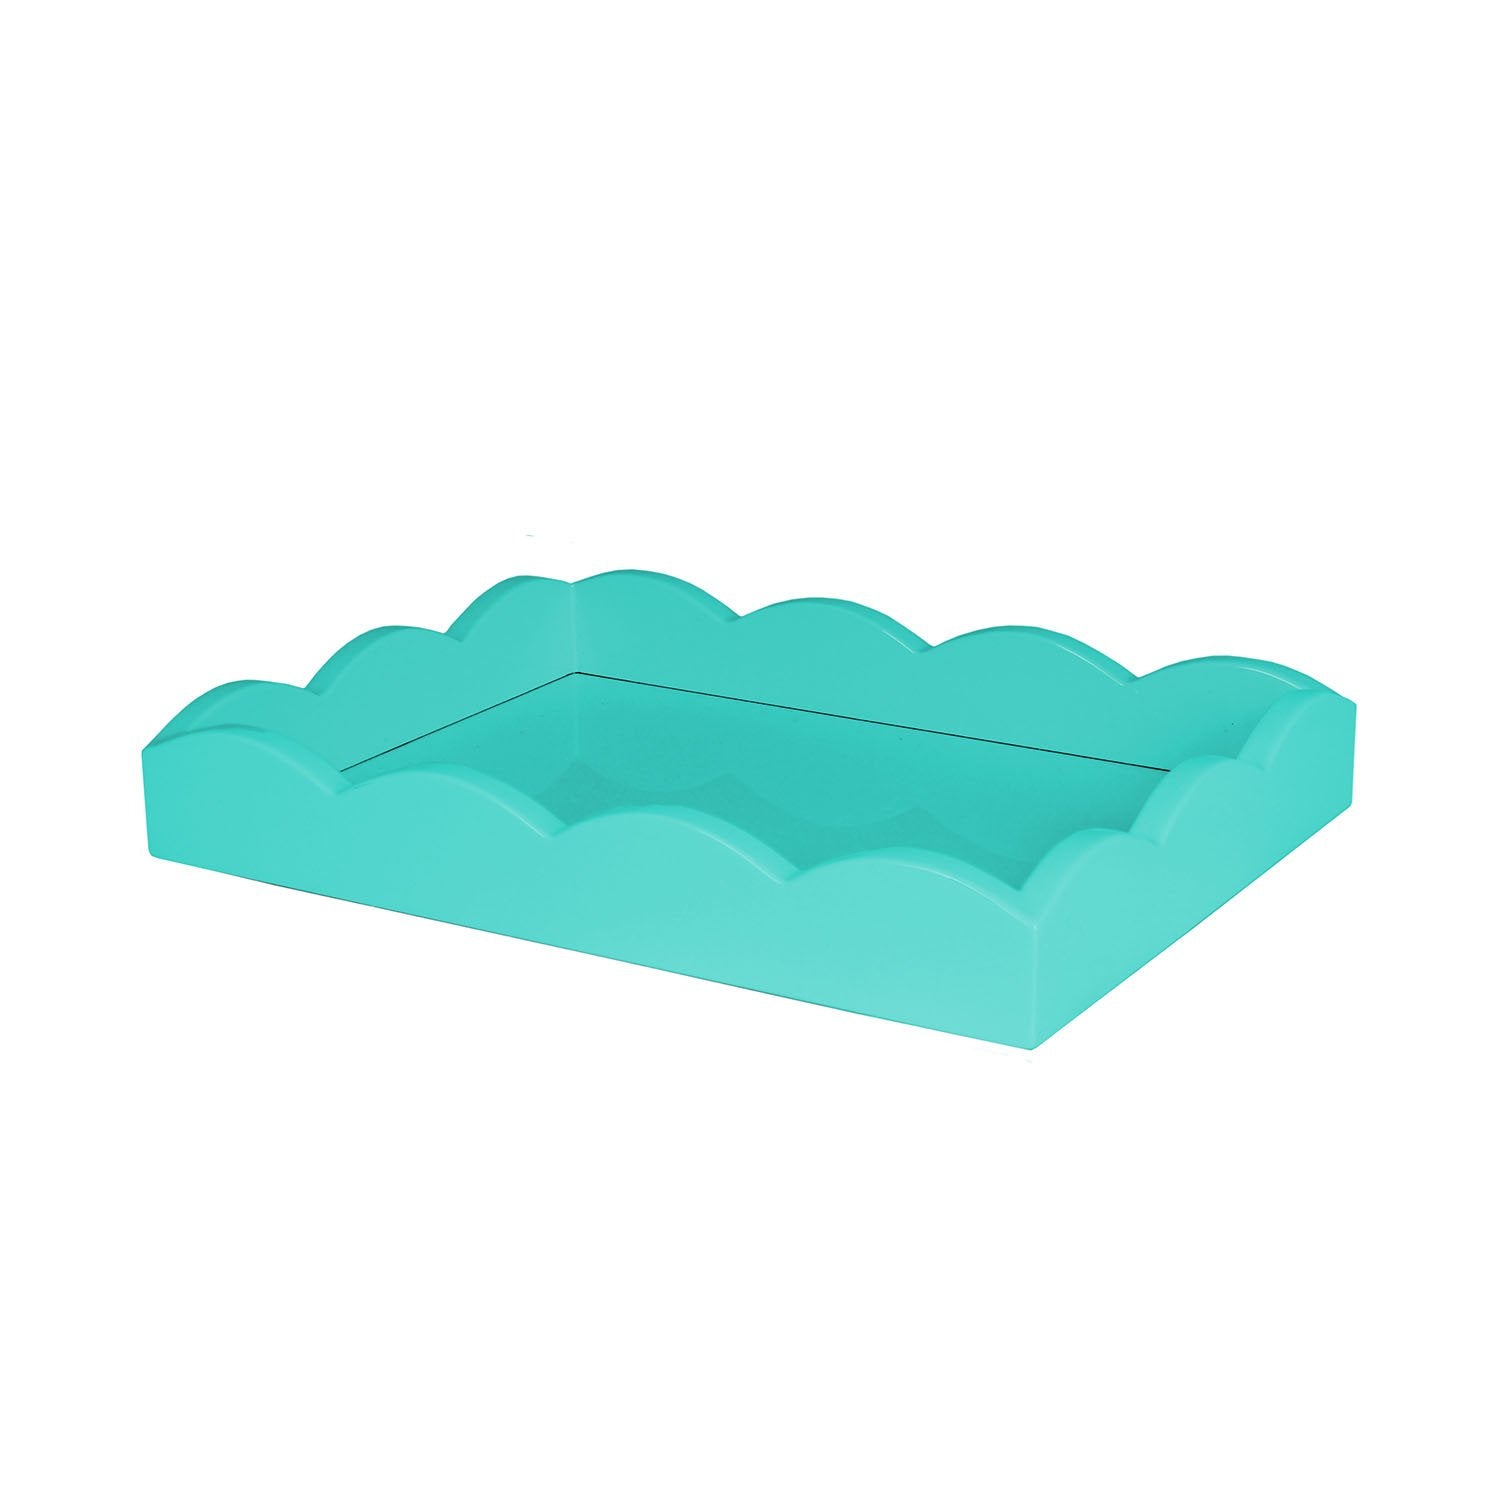 Small turquoise blue lacquer tray with a scalloped edge